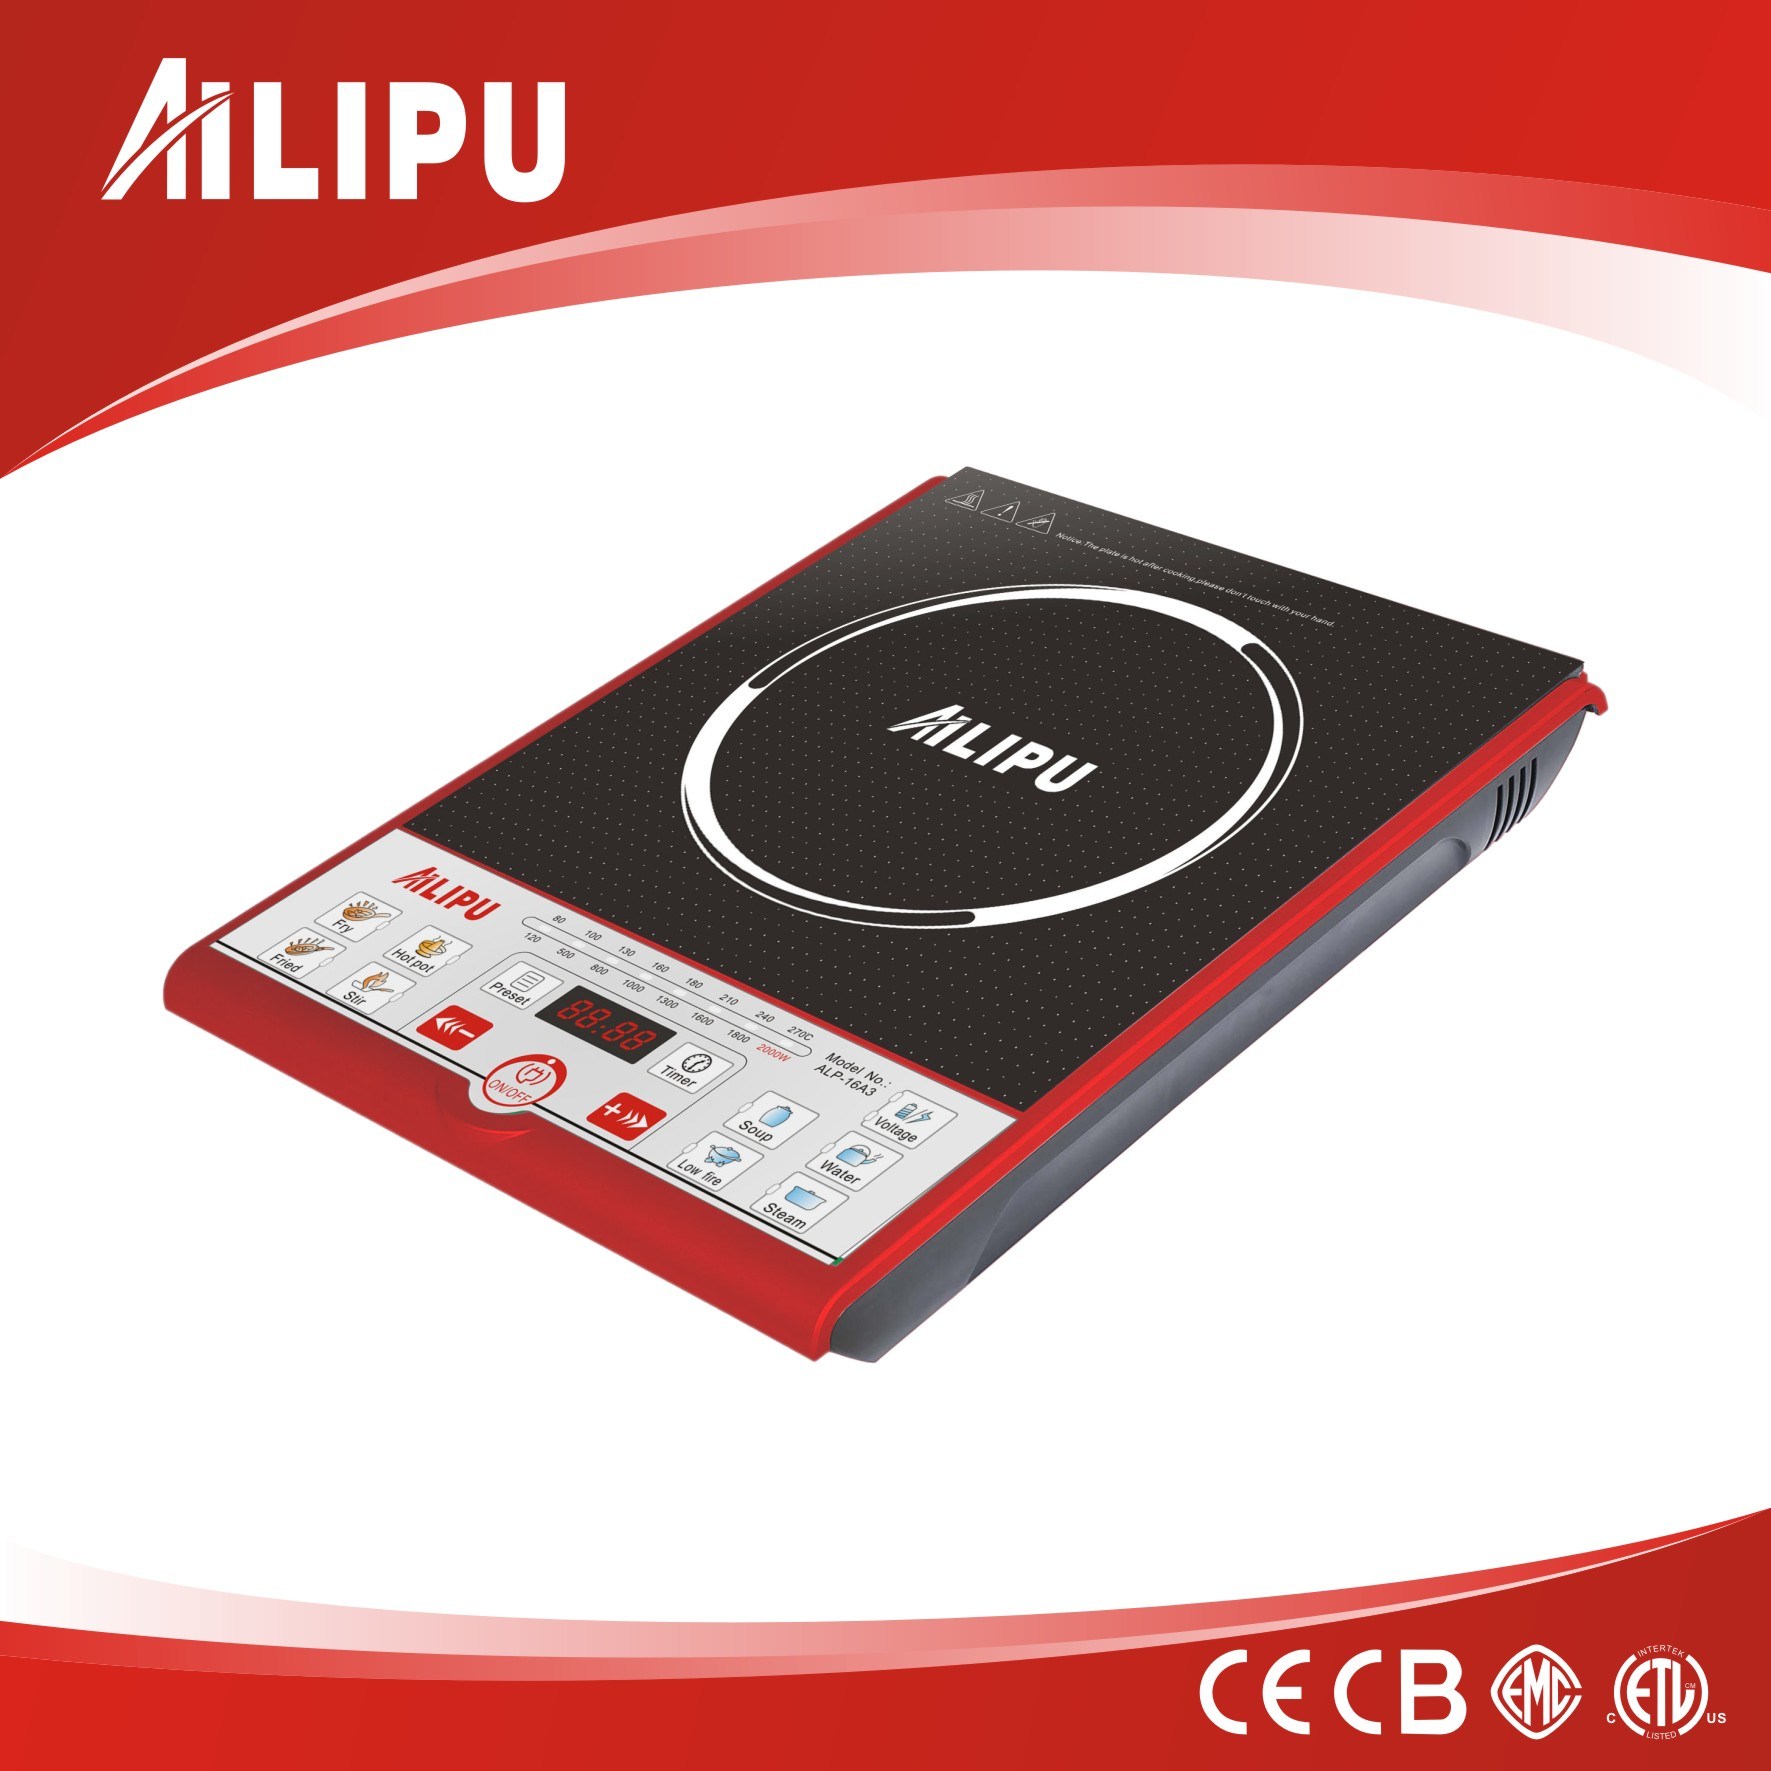 Push Button Induction Cooker/Cooktop/Electric Stove Hotplate (SM-16A3)